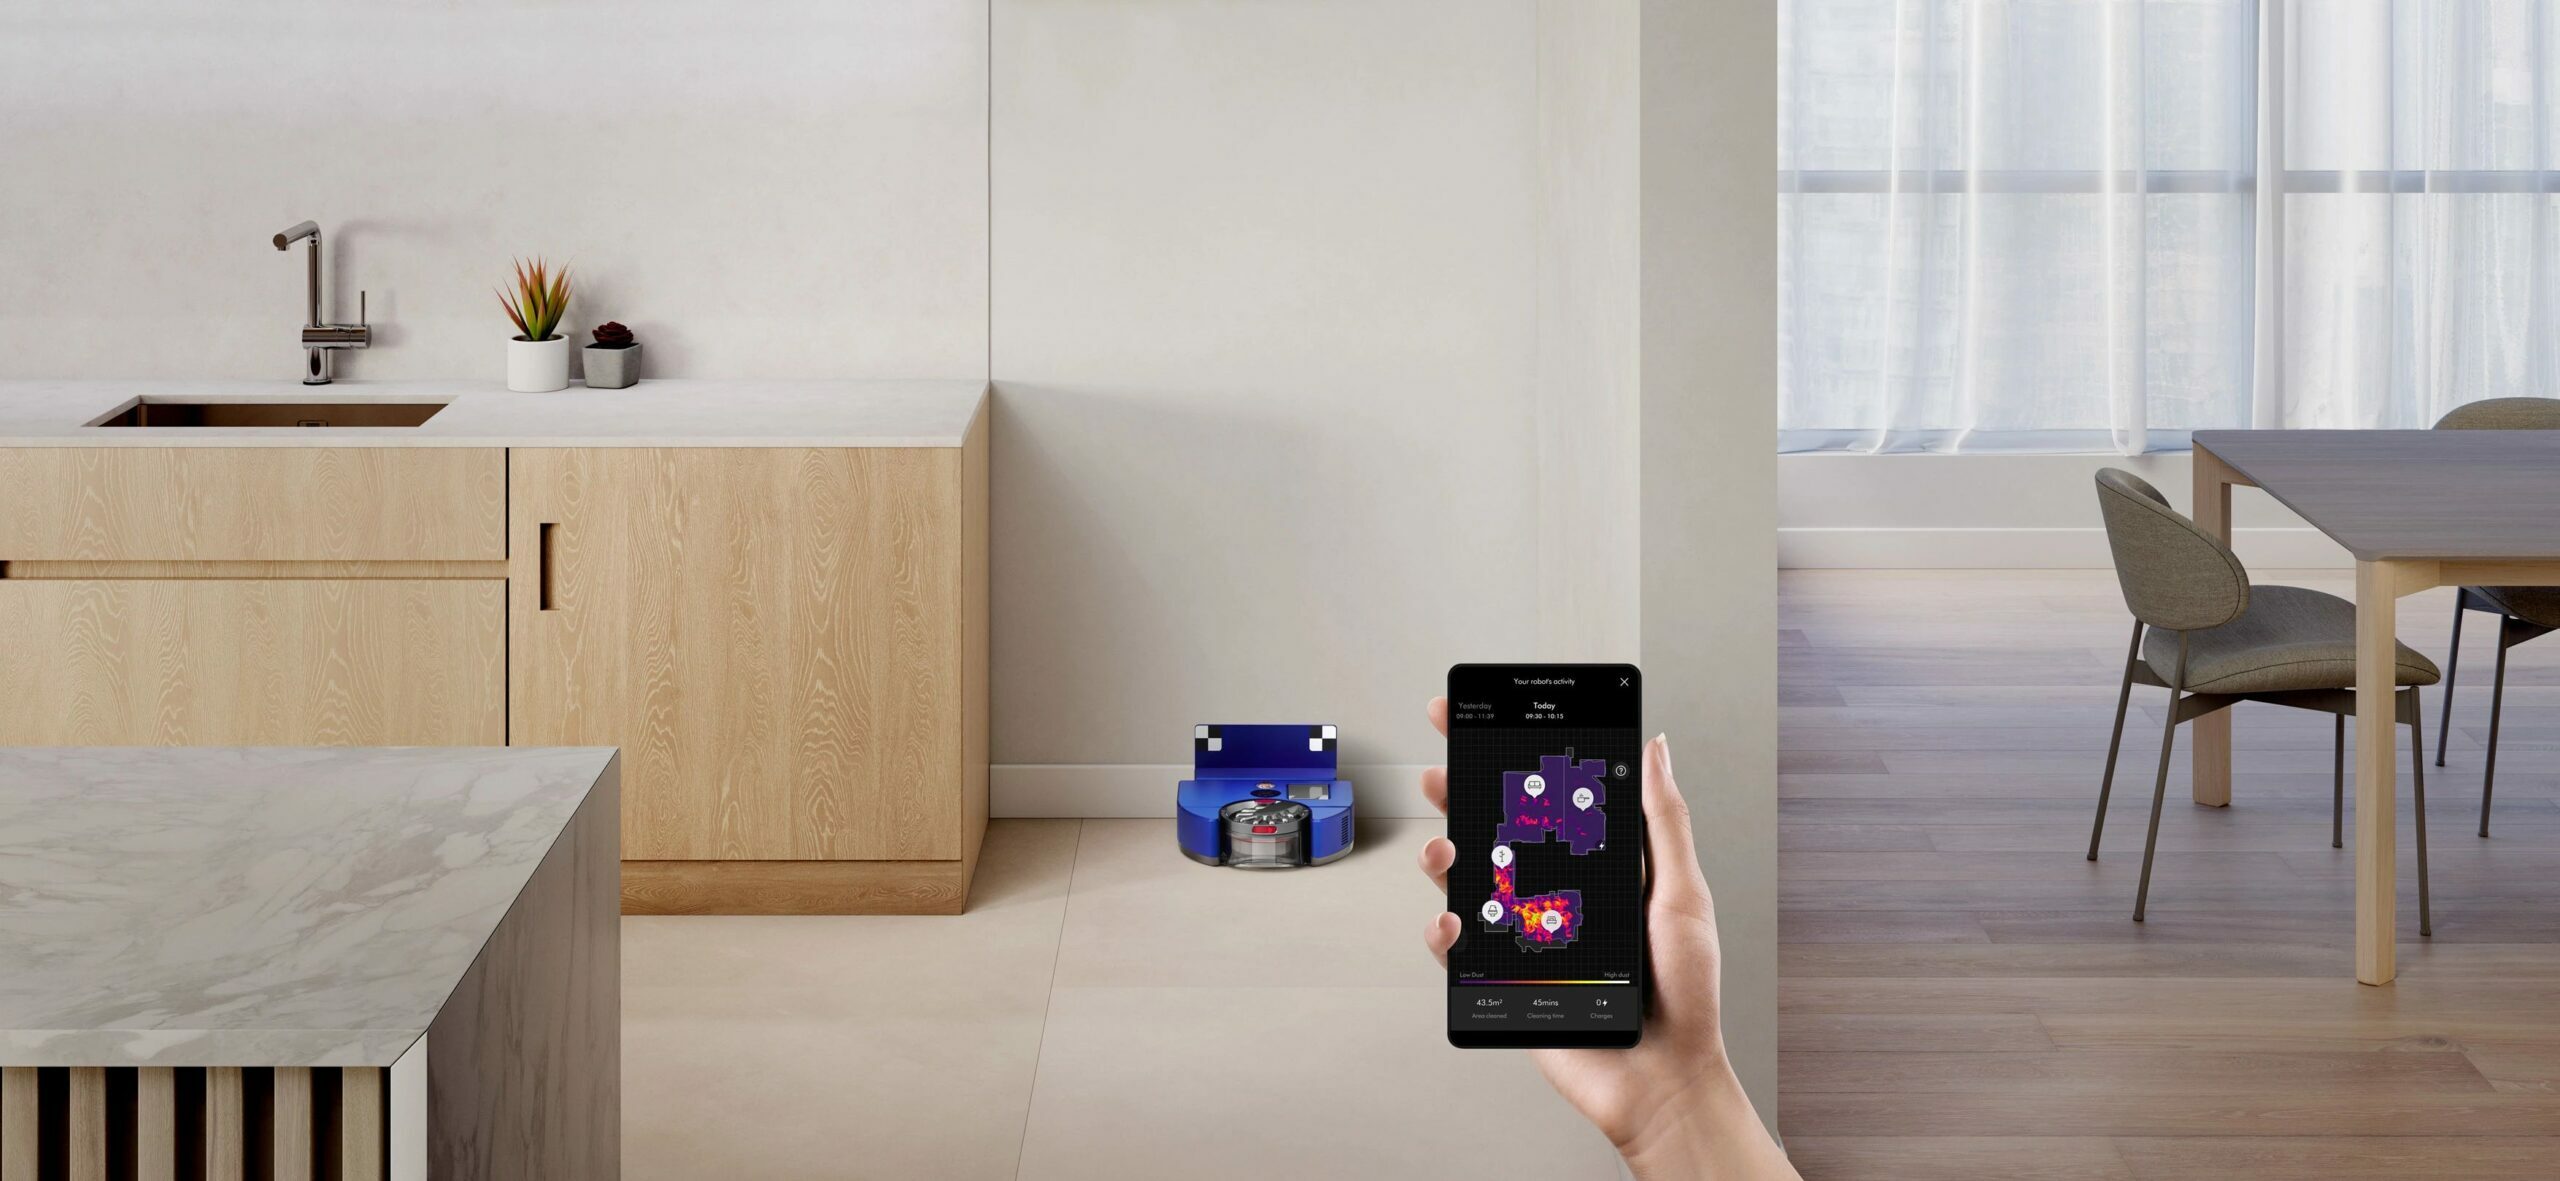 Dyson 360 Vis Nav robot vacuum and dock sitting against wall in kitchen with counter and dining table in peripherals